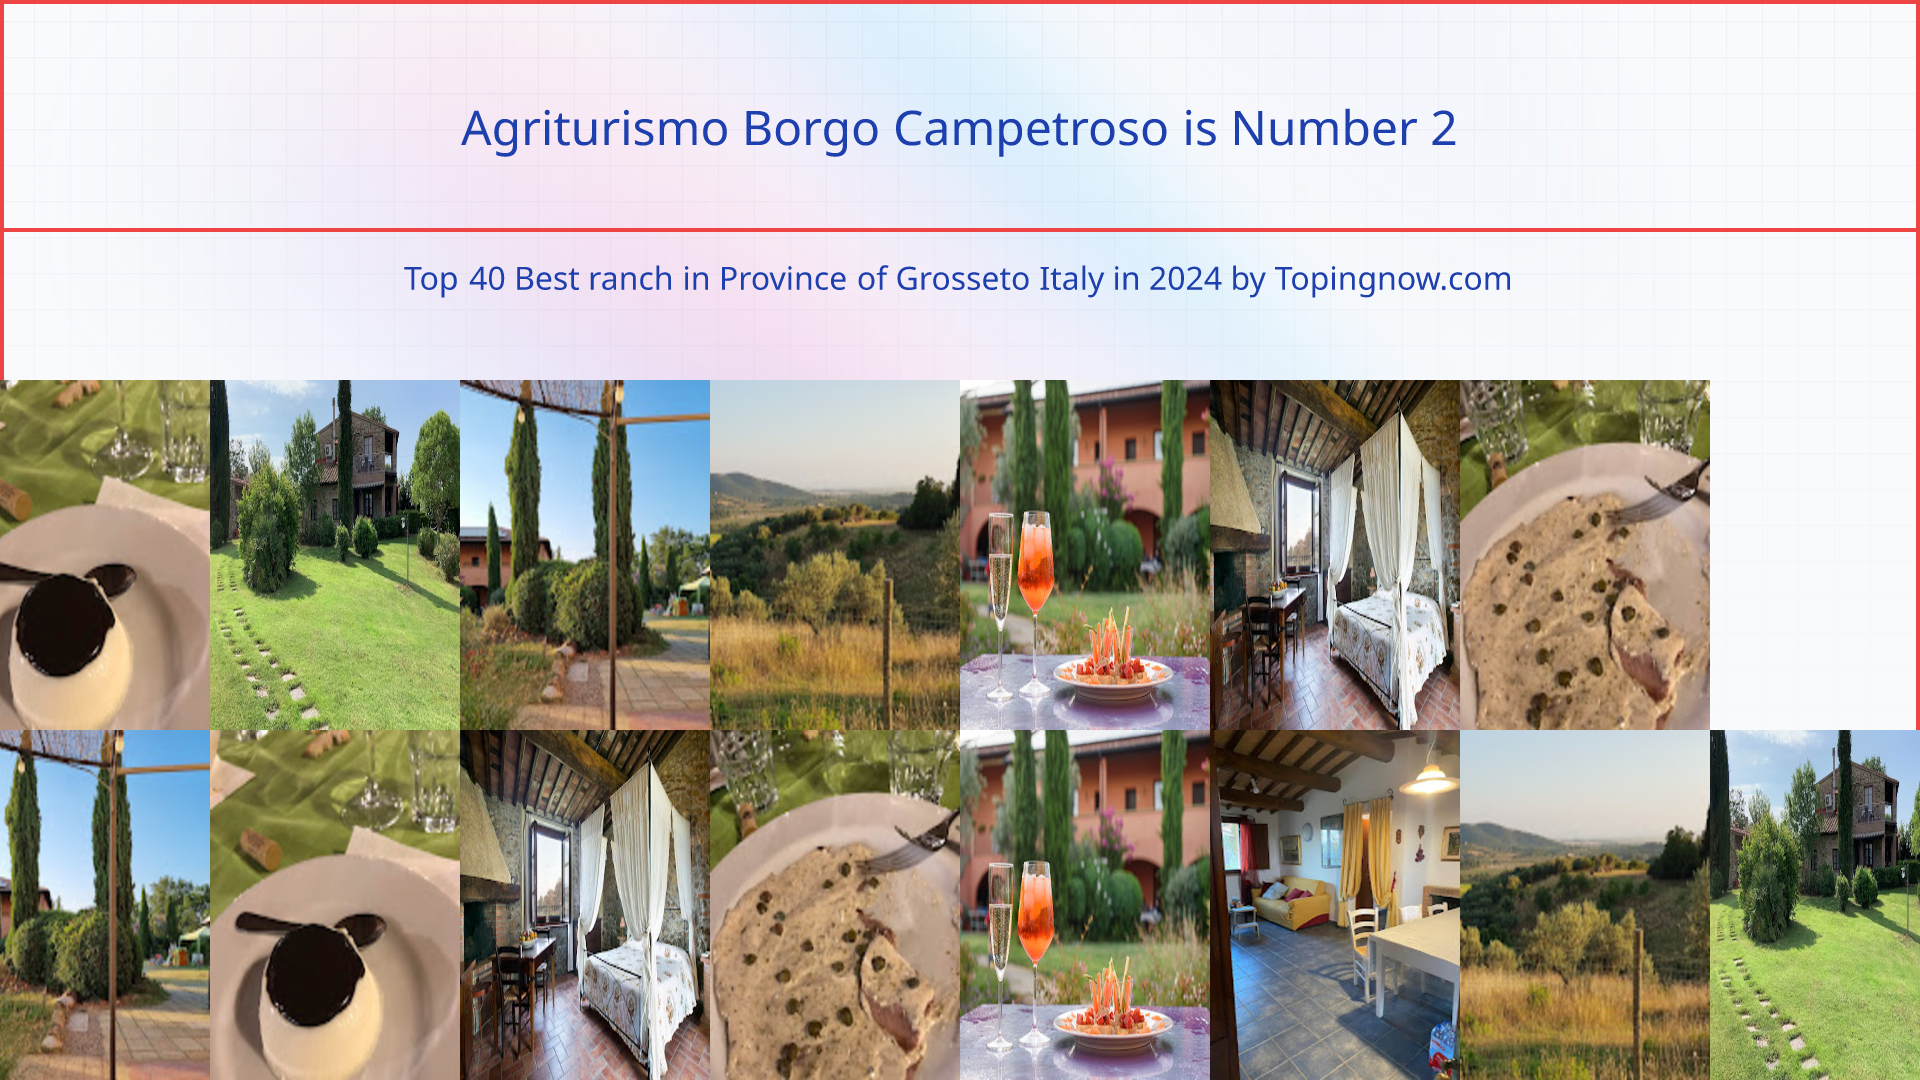 Agriturismo Borgo Campetroso: Top 40 Best ranch in Province of Grosseto Italy in 2024